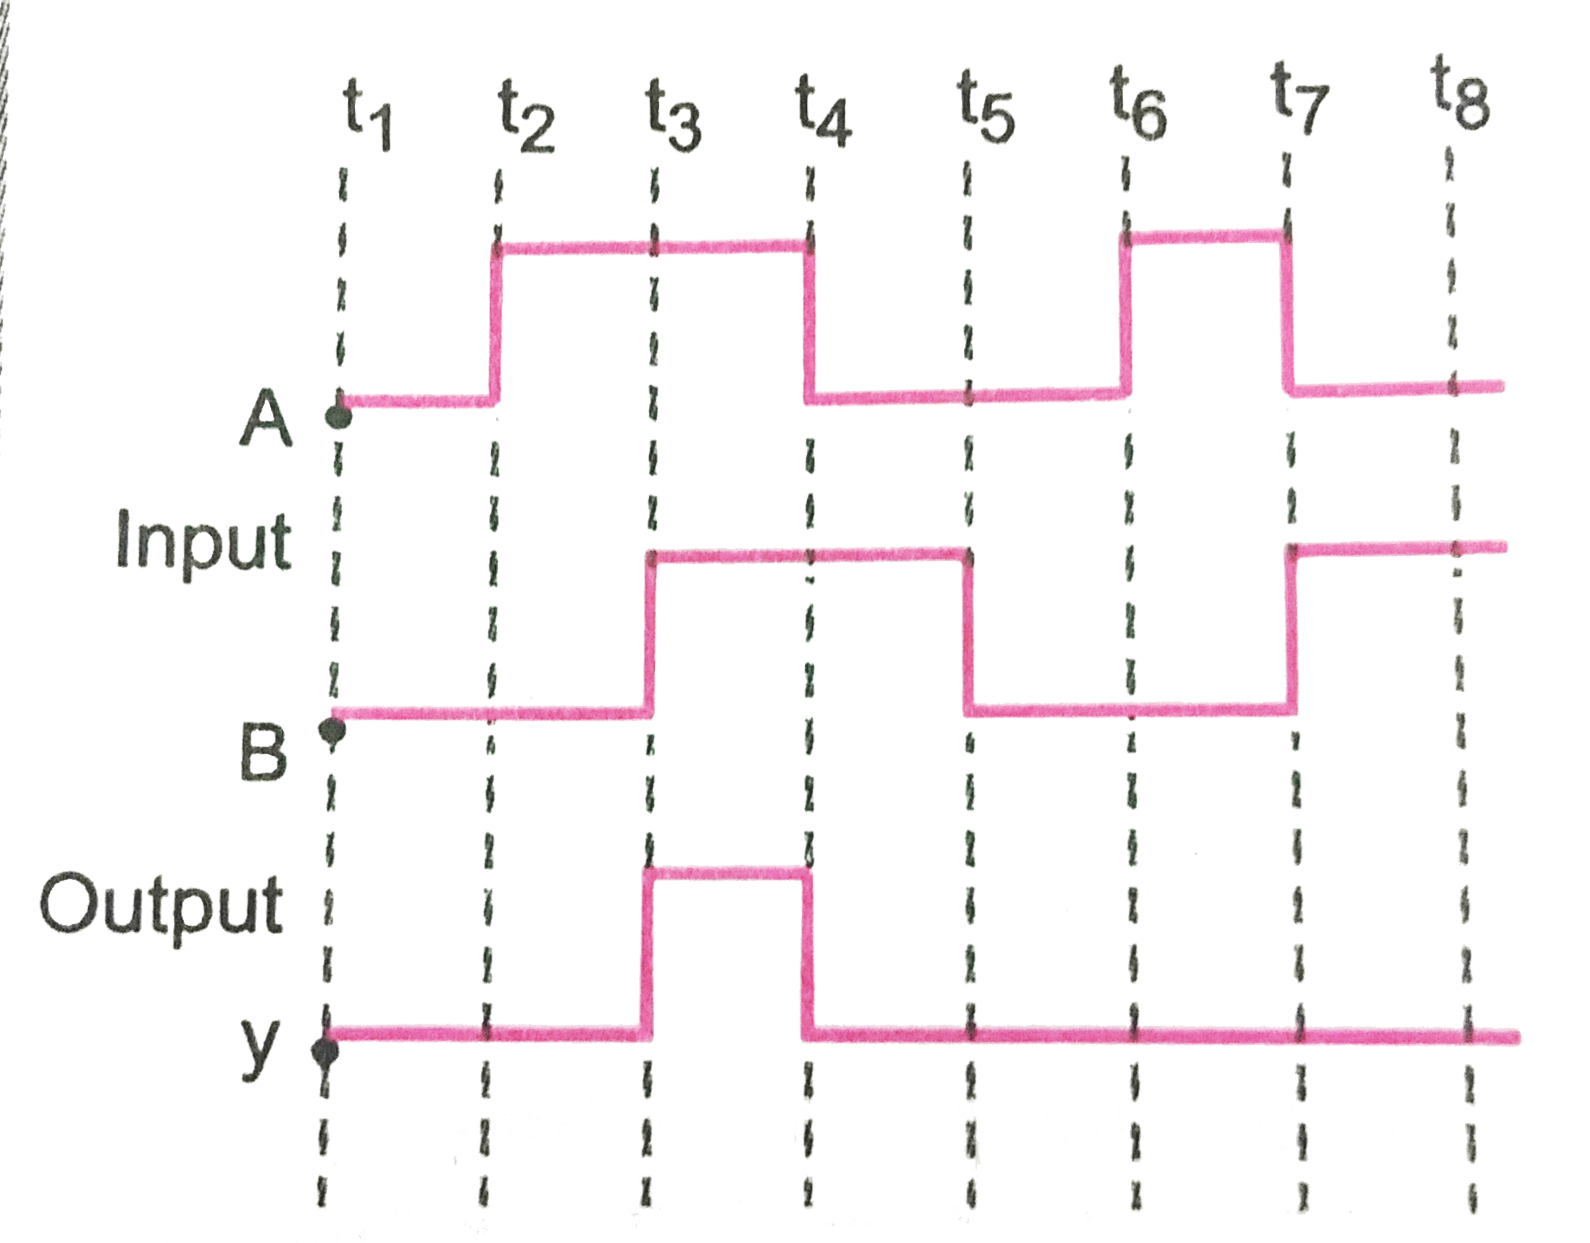 The Fig.shows the input wavwforms A and B for 'AND' gate. Draw the output waveform and write the truth table for this logic gate.